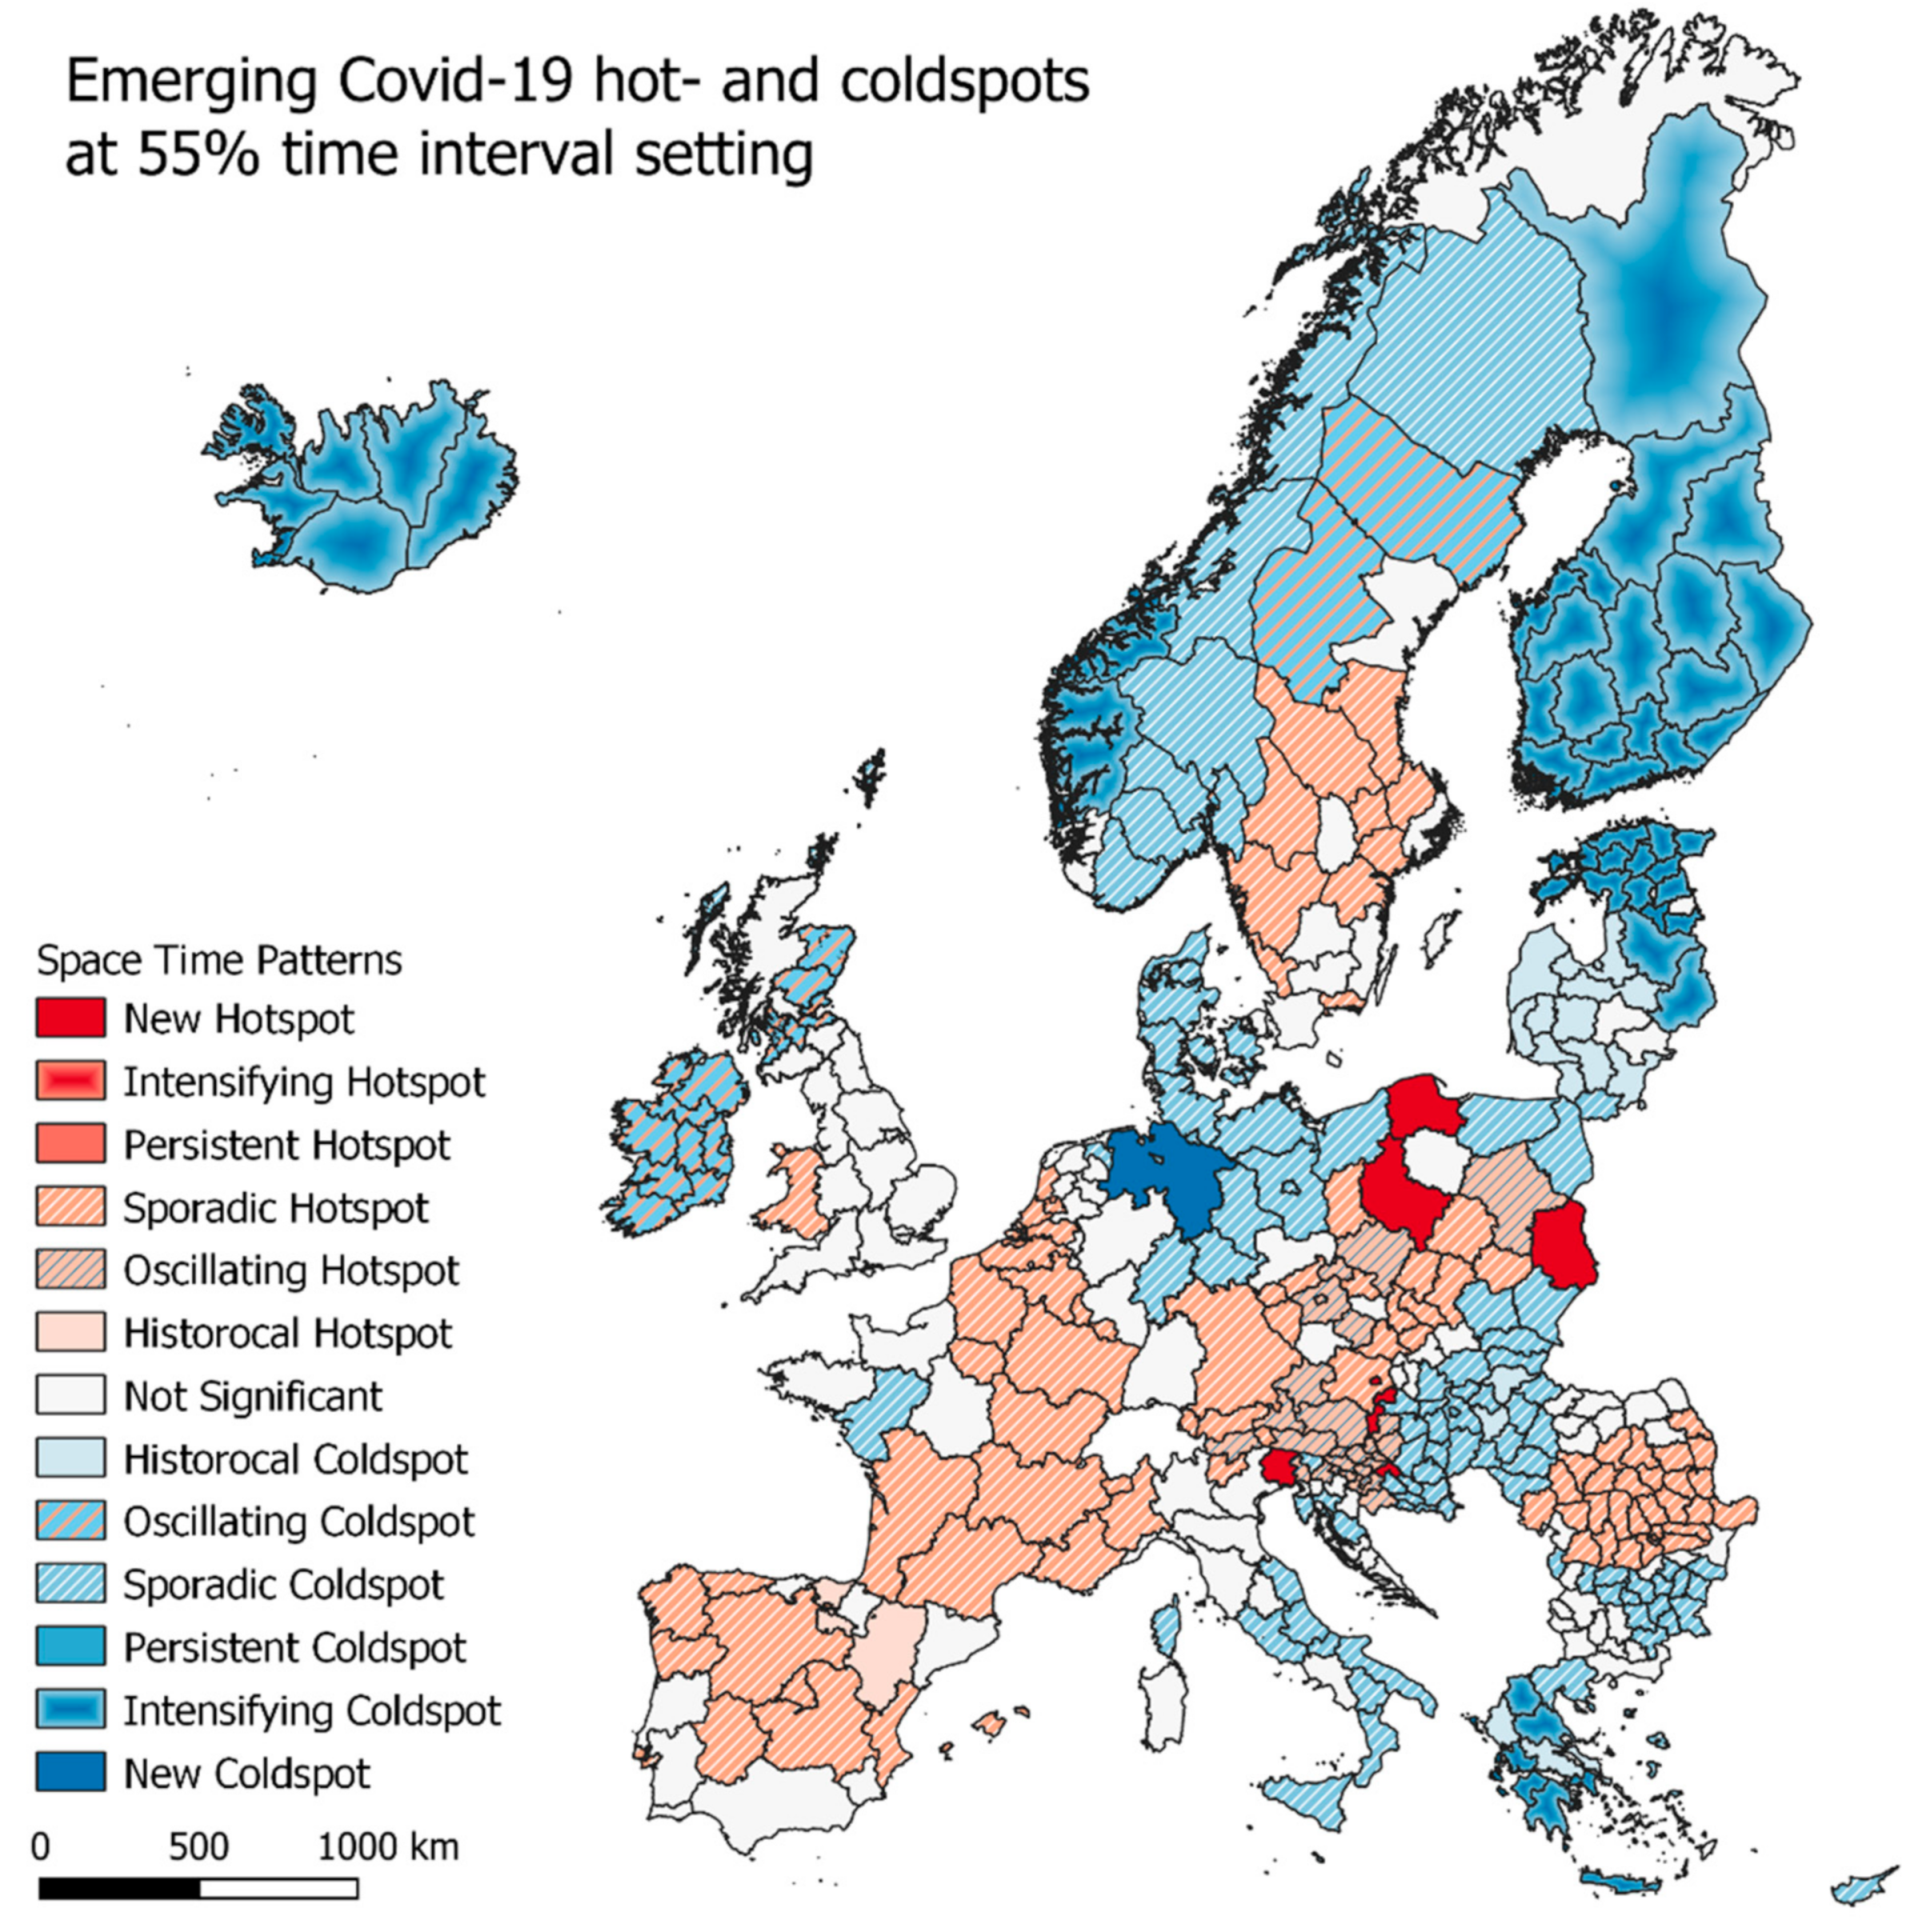 Geography of Covid-19 pandemic and its consequences